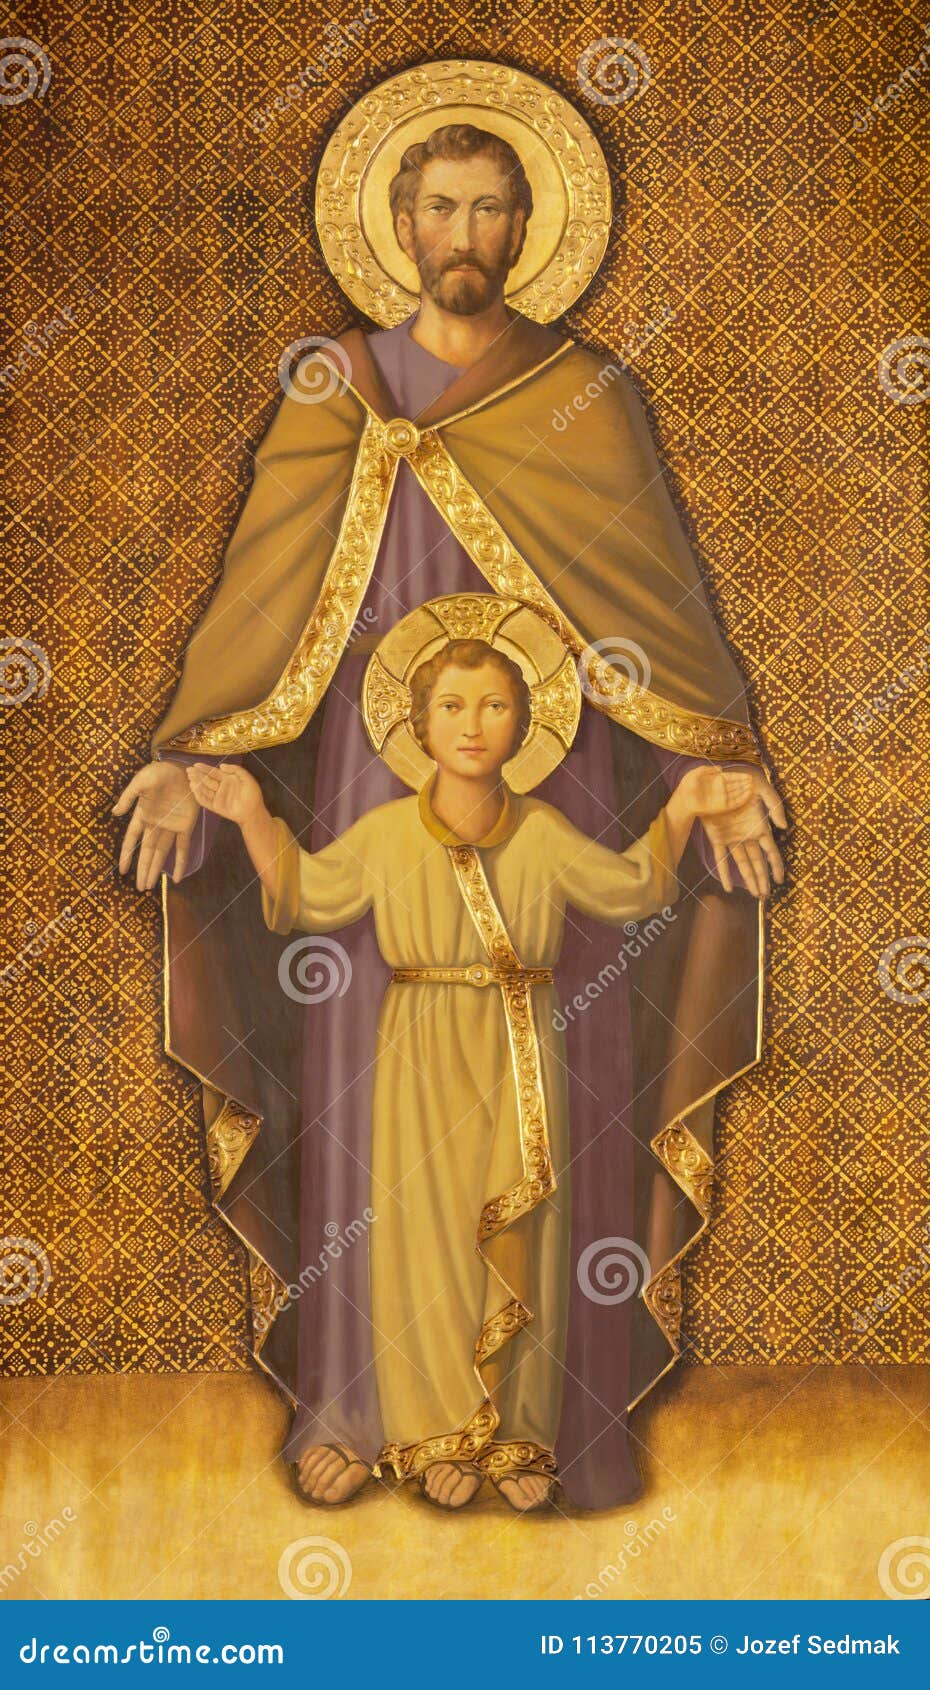 262 St Joseph Painting Photos Free Royalty Free Stock Photos From Dreamstime